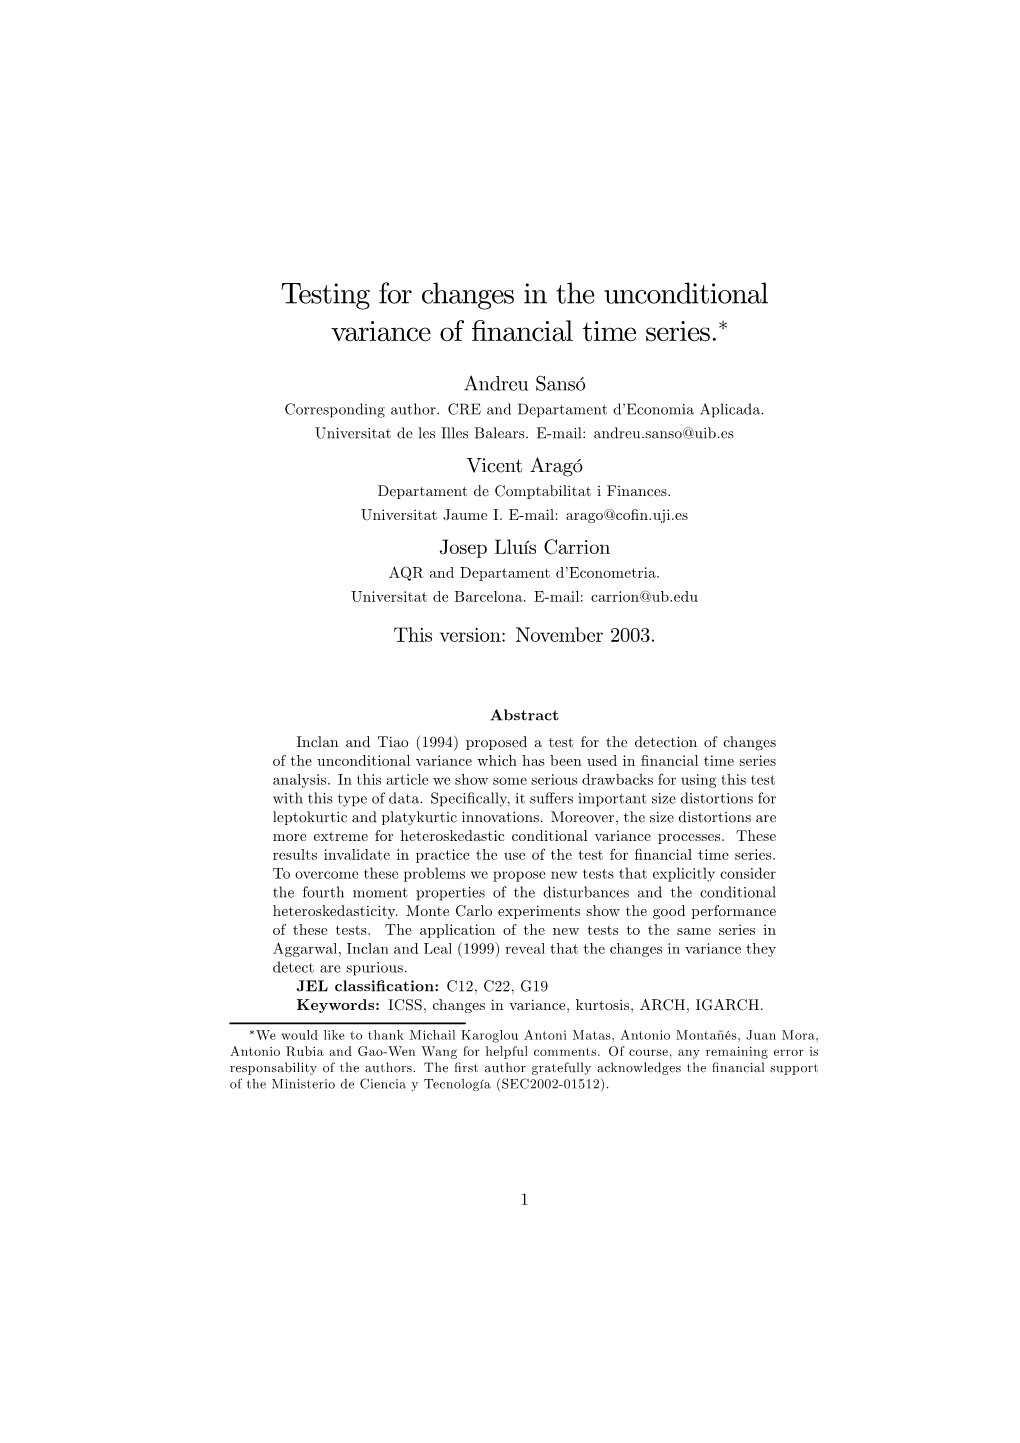 Testing for Changes in the Unconditional Variance of Financial